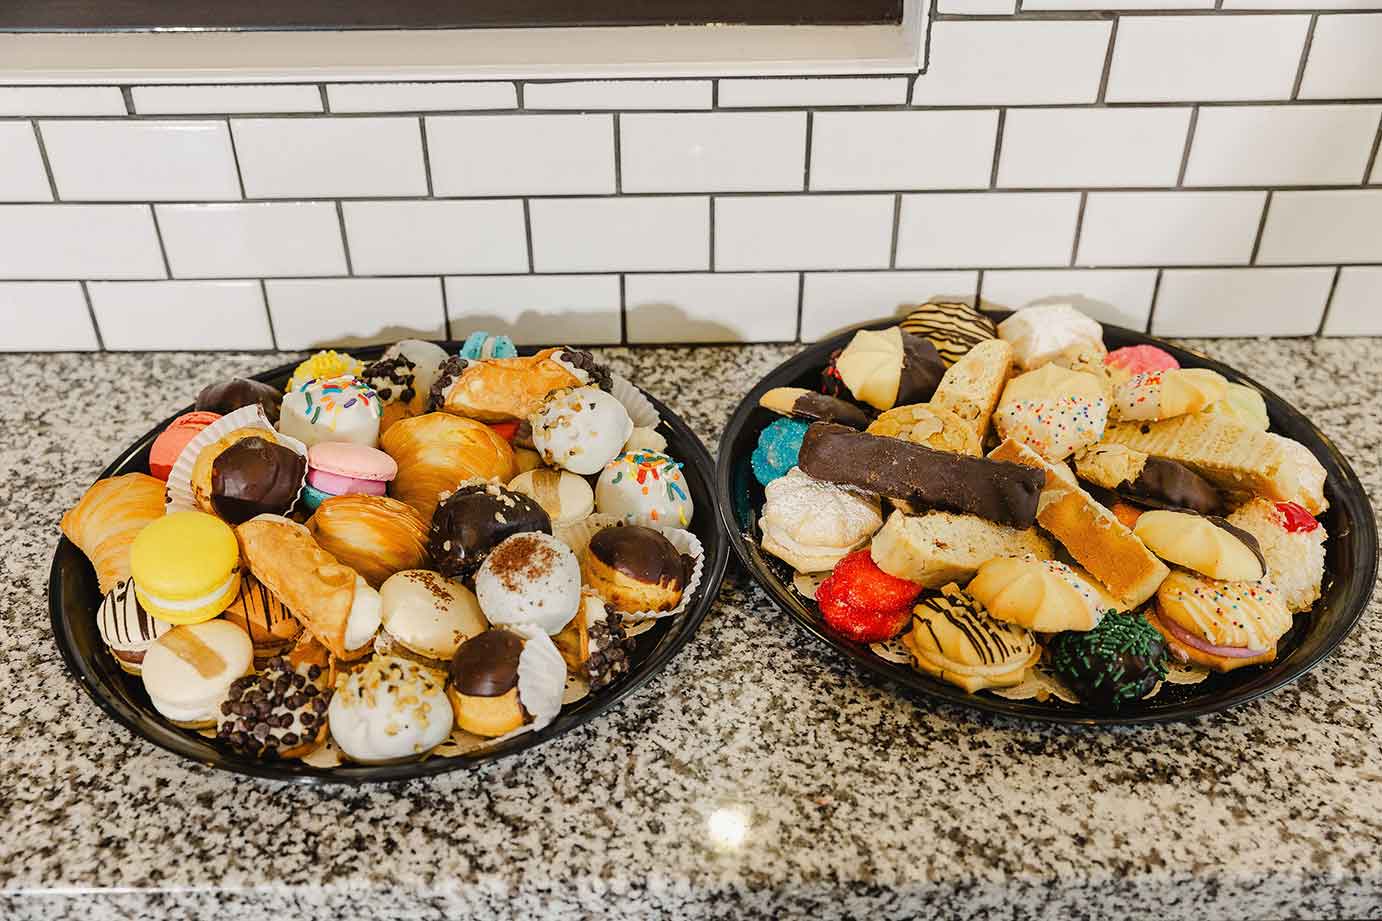 Two served trays of cookies and sweets